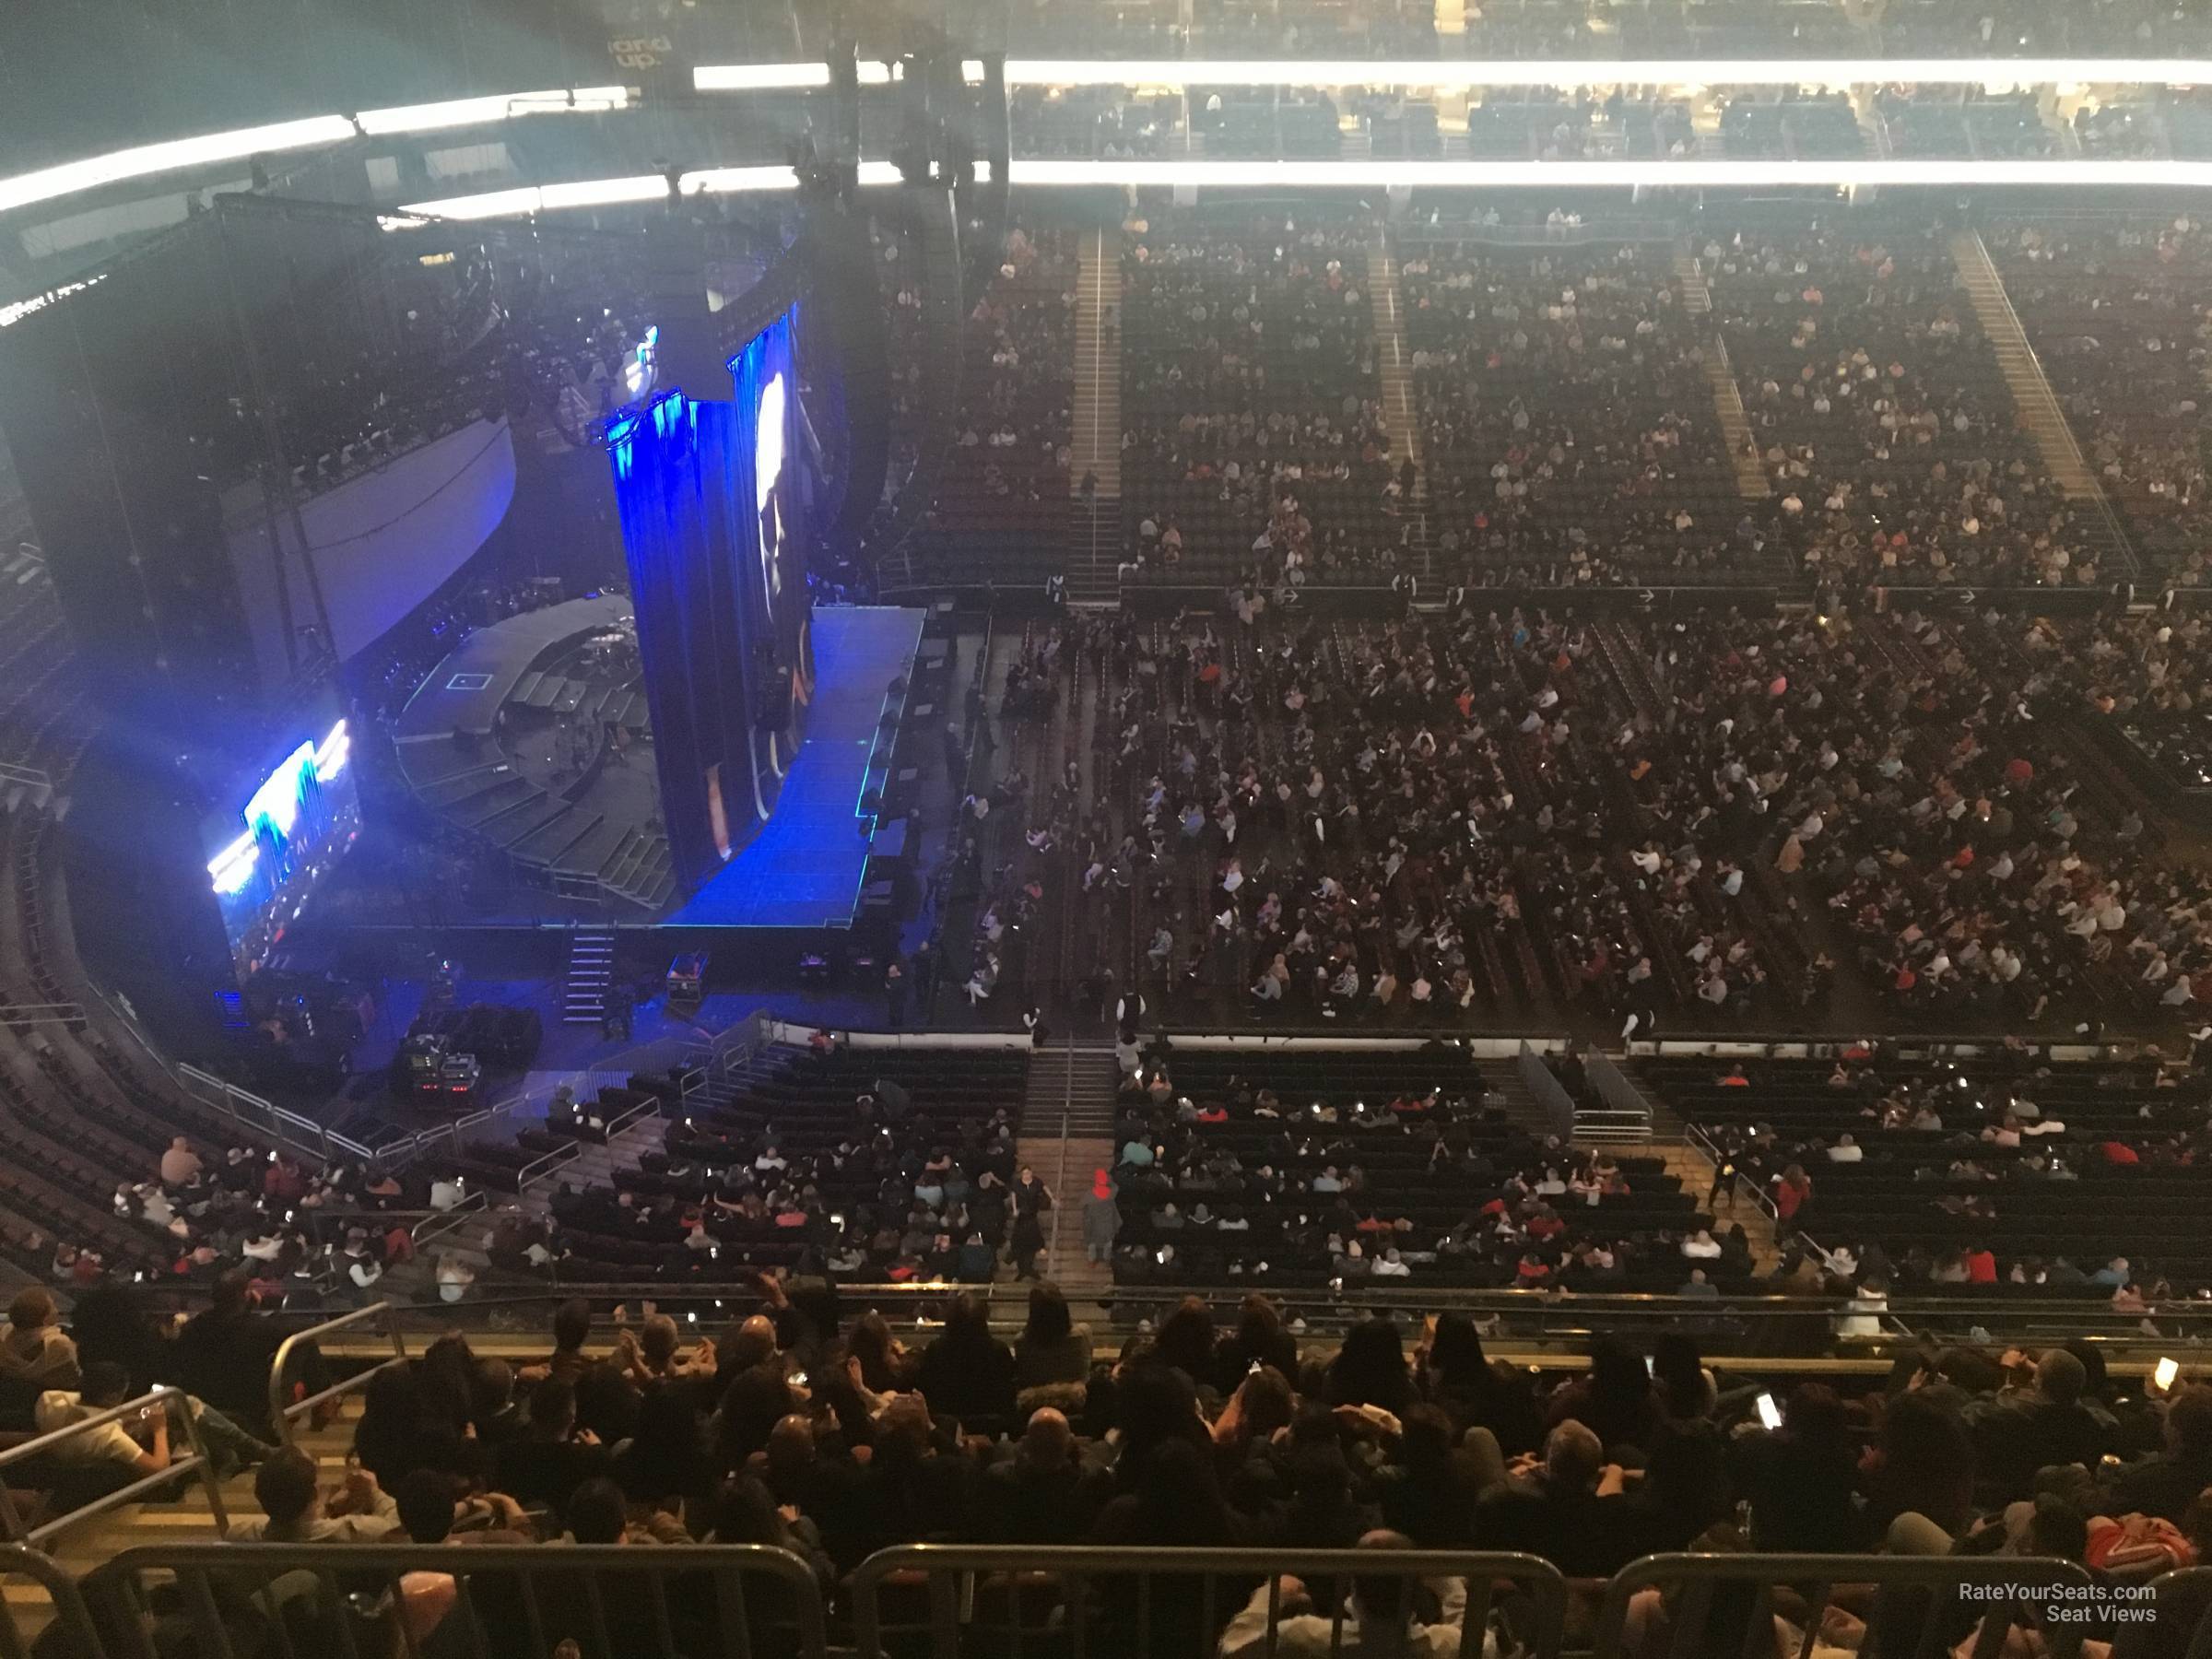 Section 228 at Prudential Center for Concerts